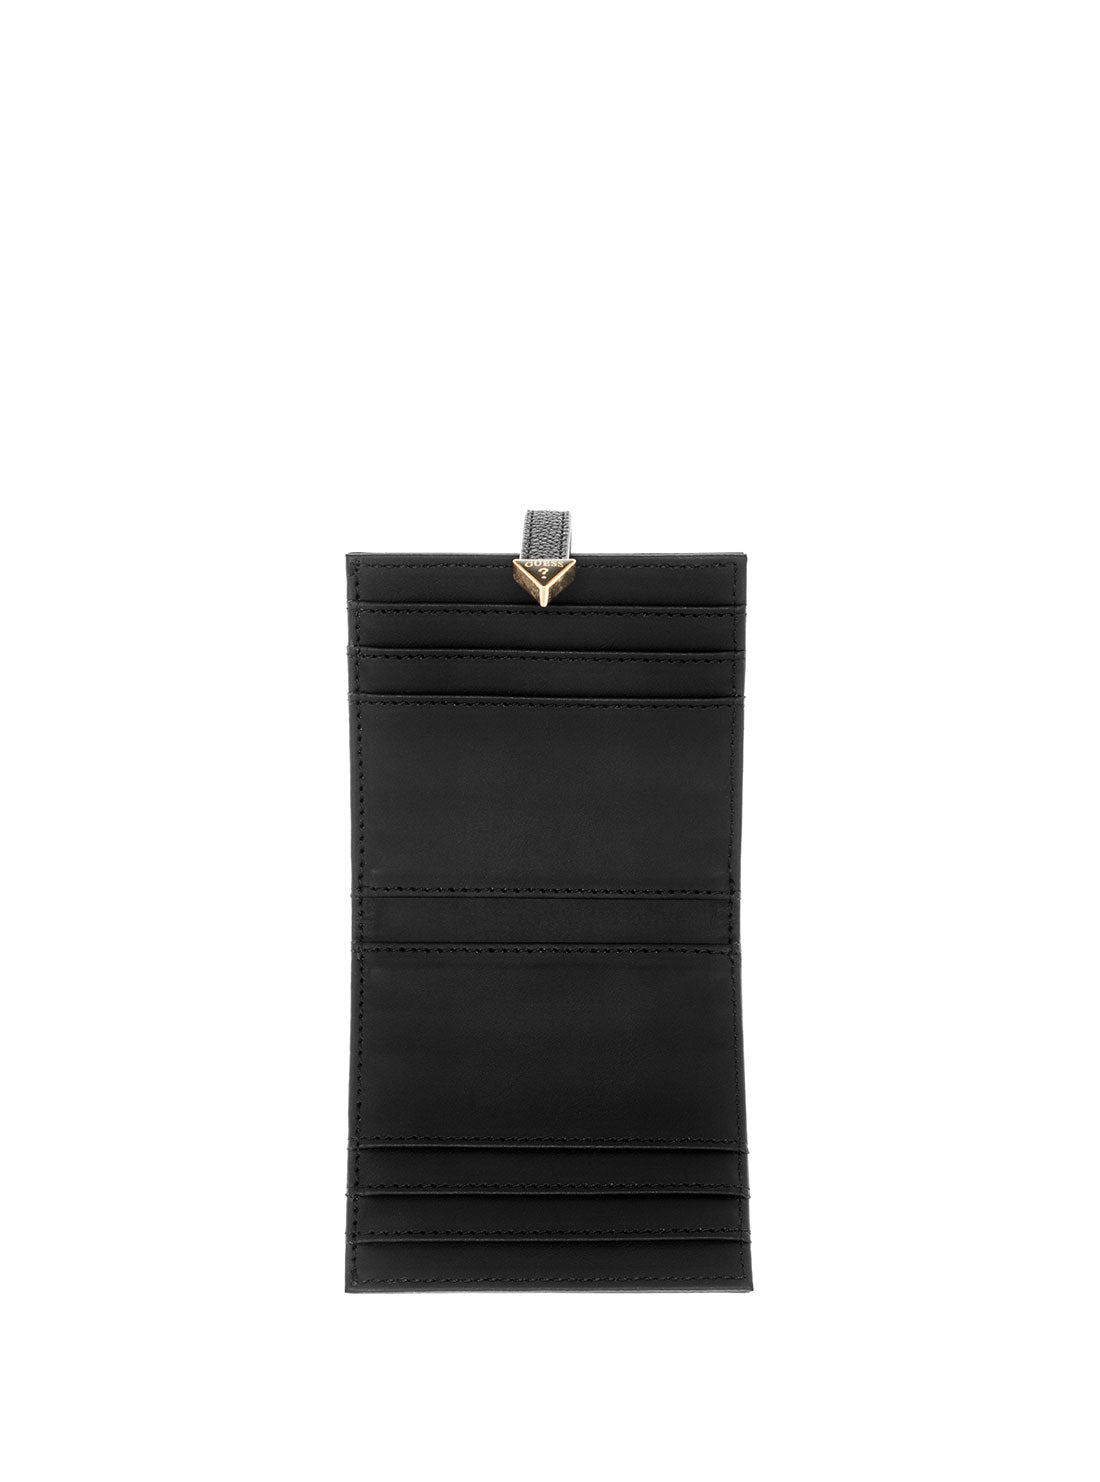 Black Laurel Small Card Case inside view